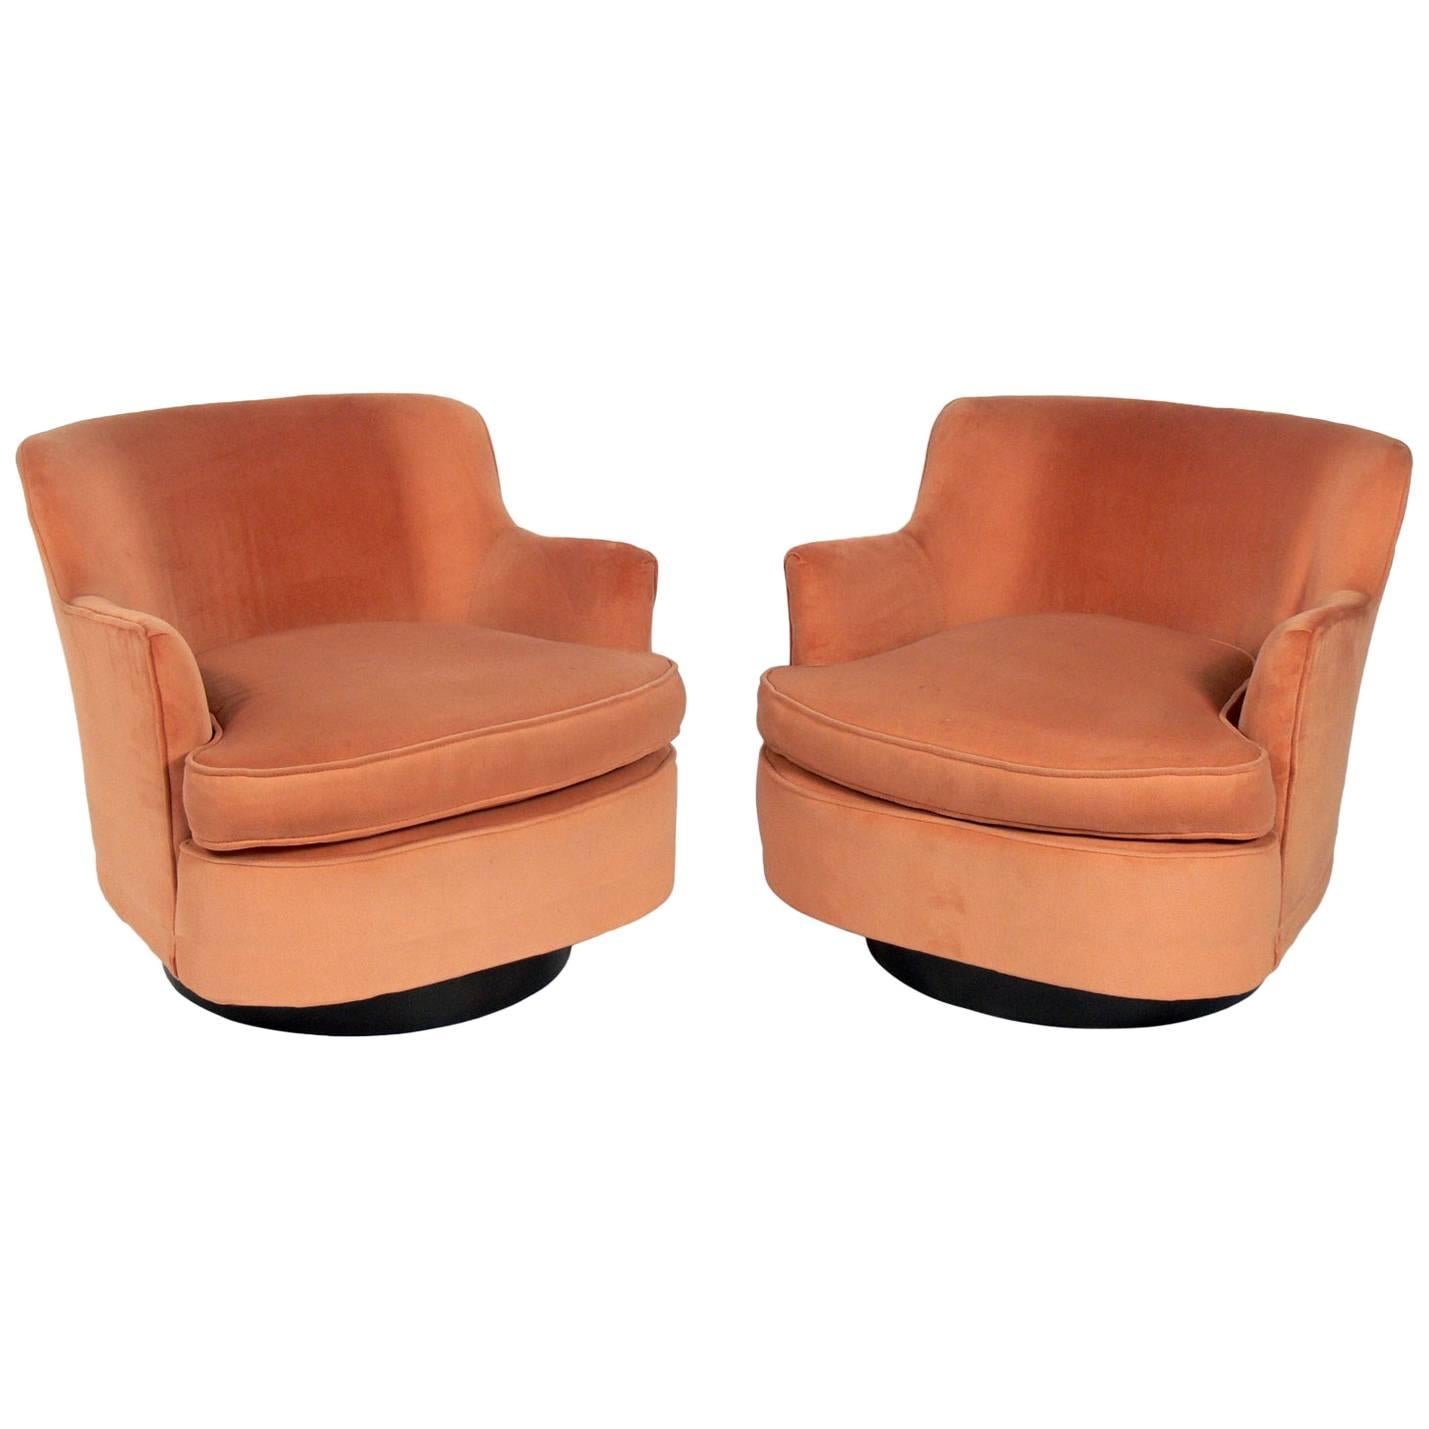 Pair of Mid-Century Modern Swivel Lounge Chairs Attributed to Adrian Pearsall